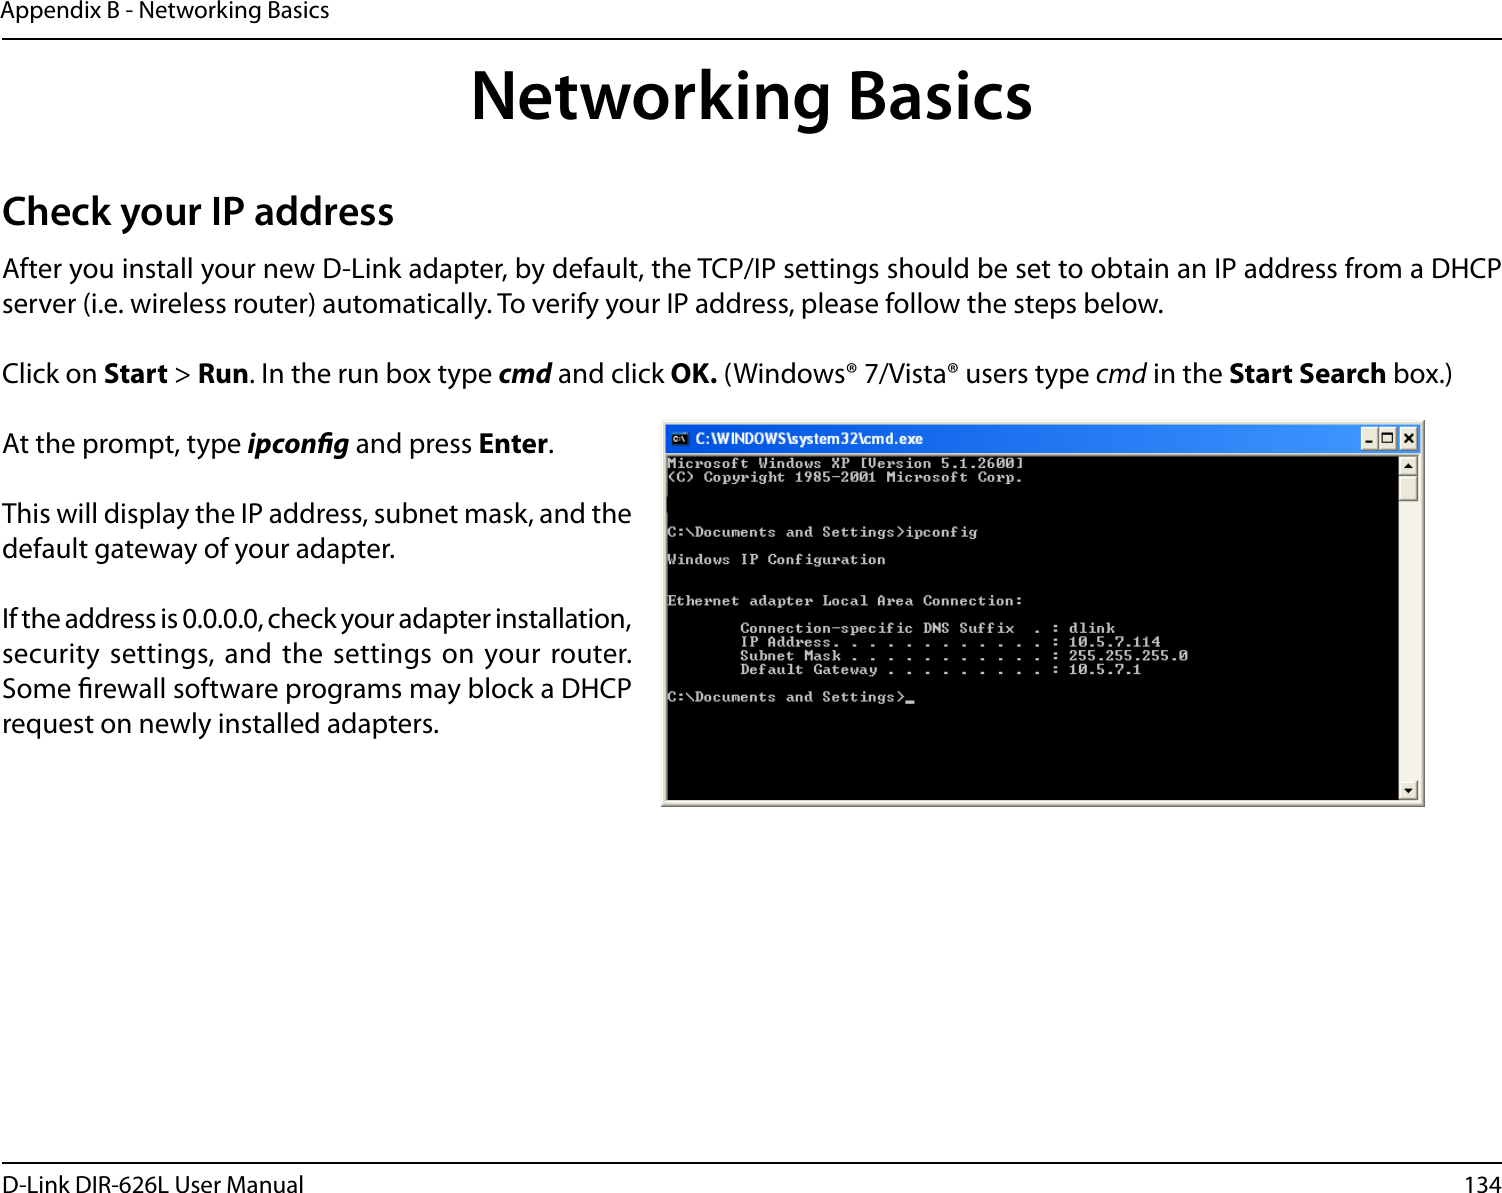 134D-Link DIR-626L User ManualAppendix B - Networking BasicsNetworking BasicsCheck your IP addressAfter you install your new D-Link adapter, by default, the TCP/IP settings should be set to obtain an IP address from a DHCP server (i.e. wireless router) automatically. To verify your IP address, please follow the steps below.Click on Start &gt; Run. In the run box type cmd and click OK. (Windows® 7/Vista® users type cmd in the Start Search box.)At the prompt, type ipcong and press Enter.This will display the IP address, subnet mask, and the default gateway of your adapter.If the address is 0.0.0.0, check your adapter installation, security  settings, and the  settings on your router. Some rewall software programs may block a DHCP request on newly installed adapters. 